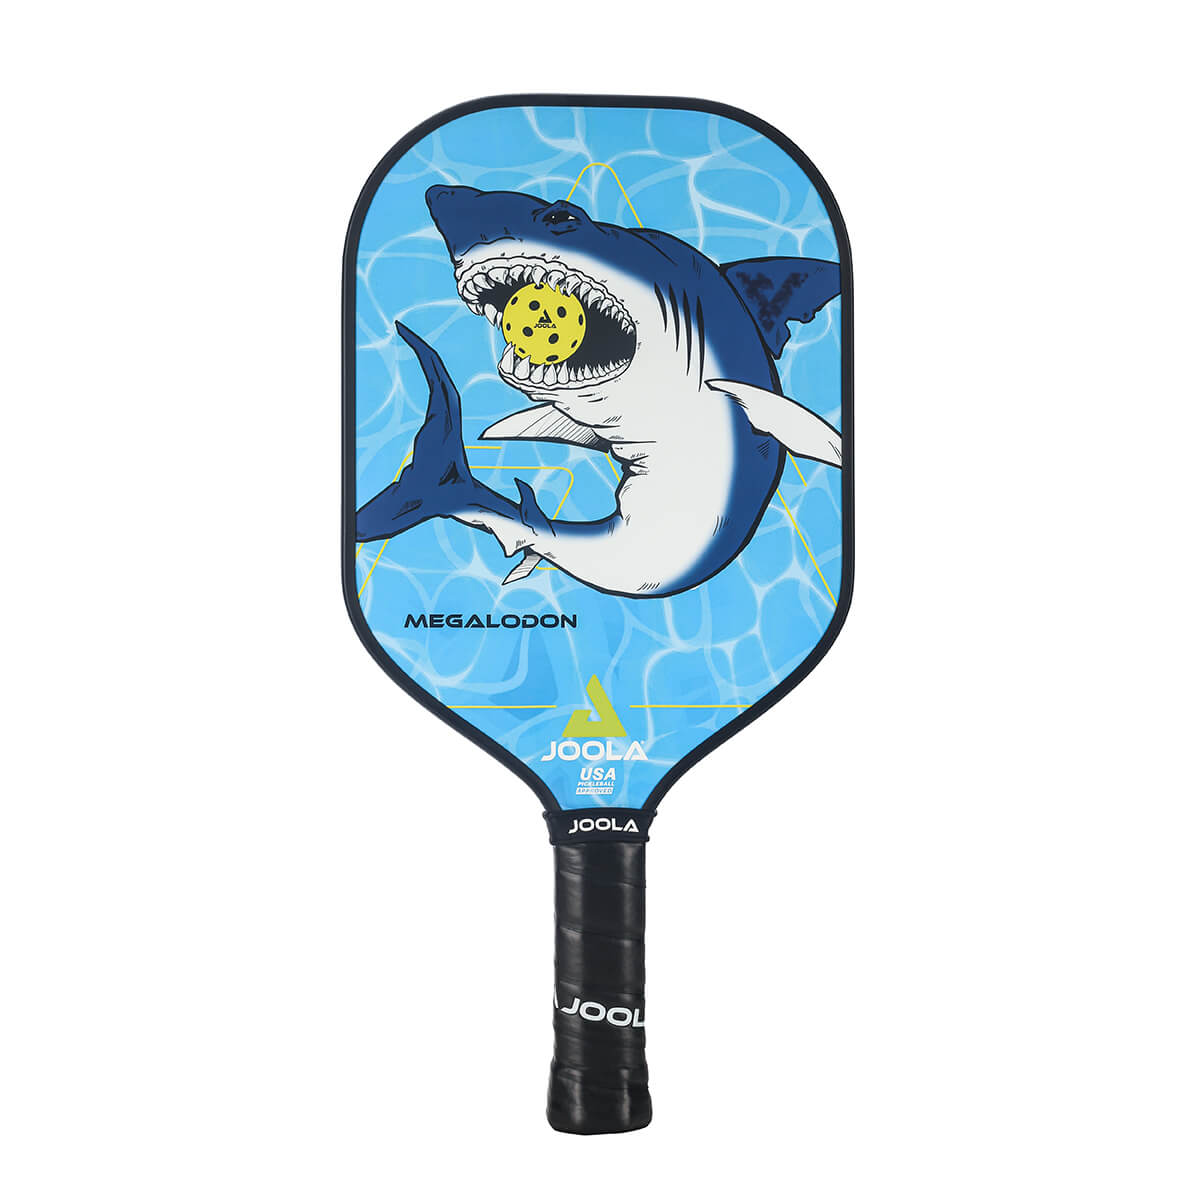 A JOOLA Junior Pickleball Paddle with a shark on it.